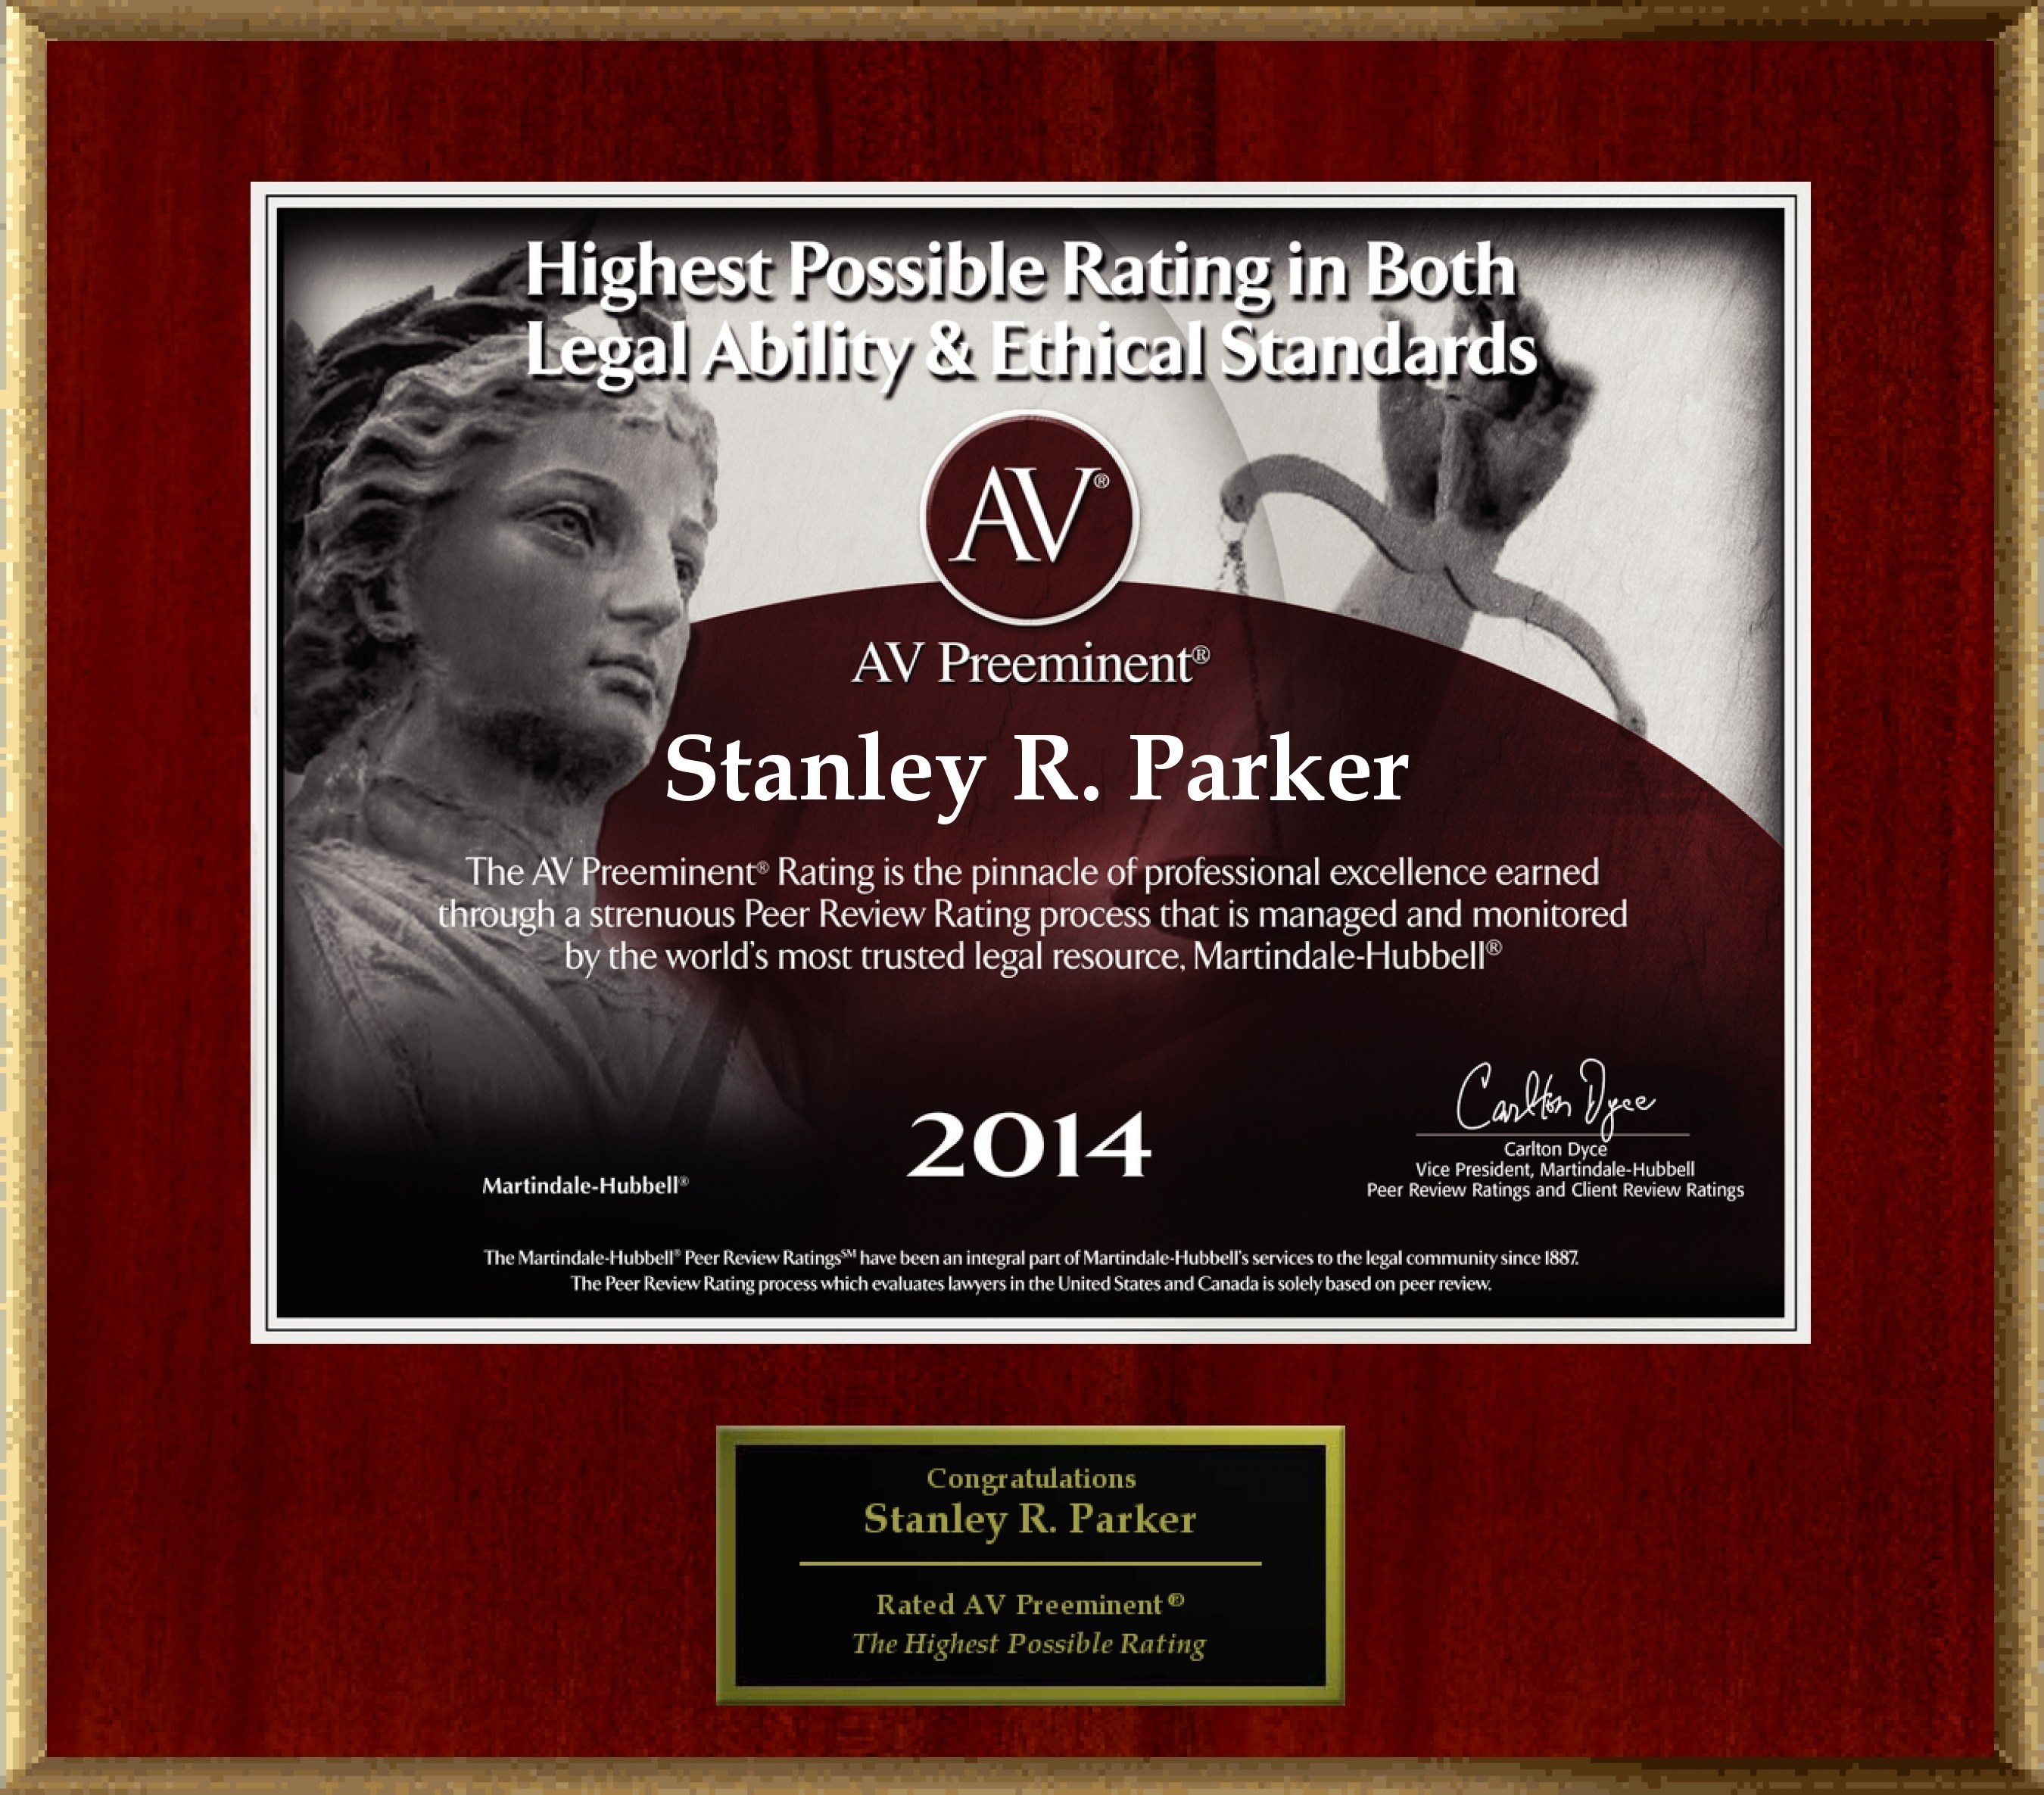 Attorney Stanley R. Parker has Achieved the AV Preeminent(R) Rating - the Highest Possible Rating from Martindale-Hubbell(R).